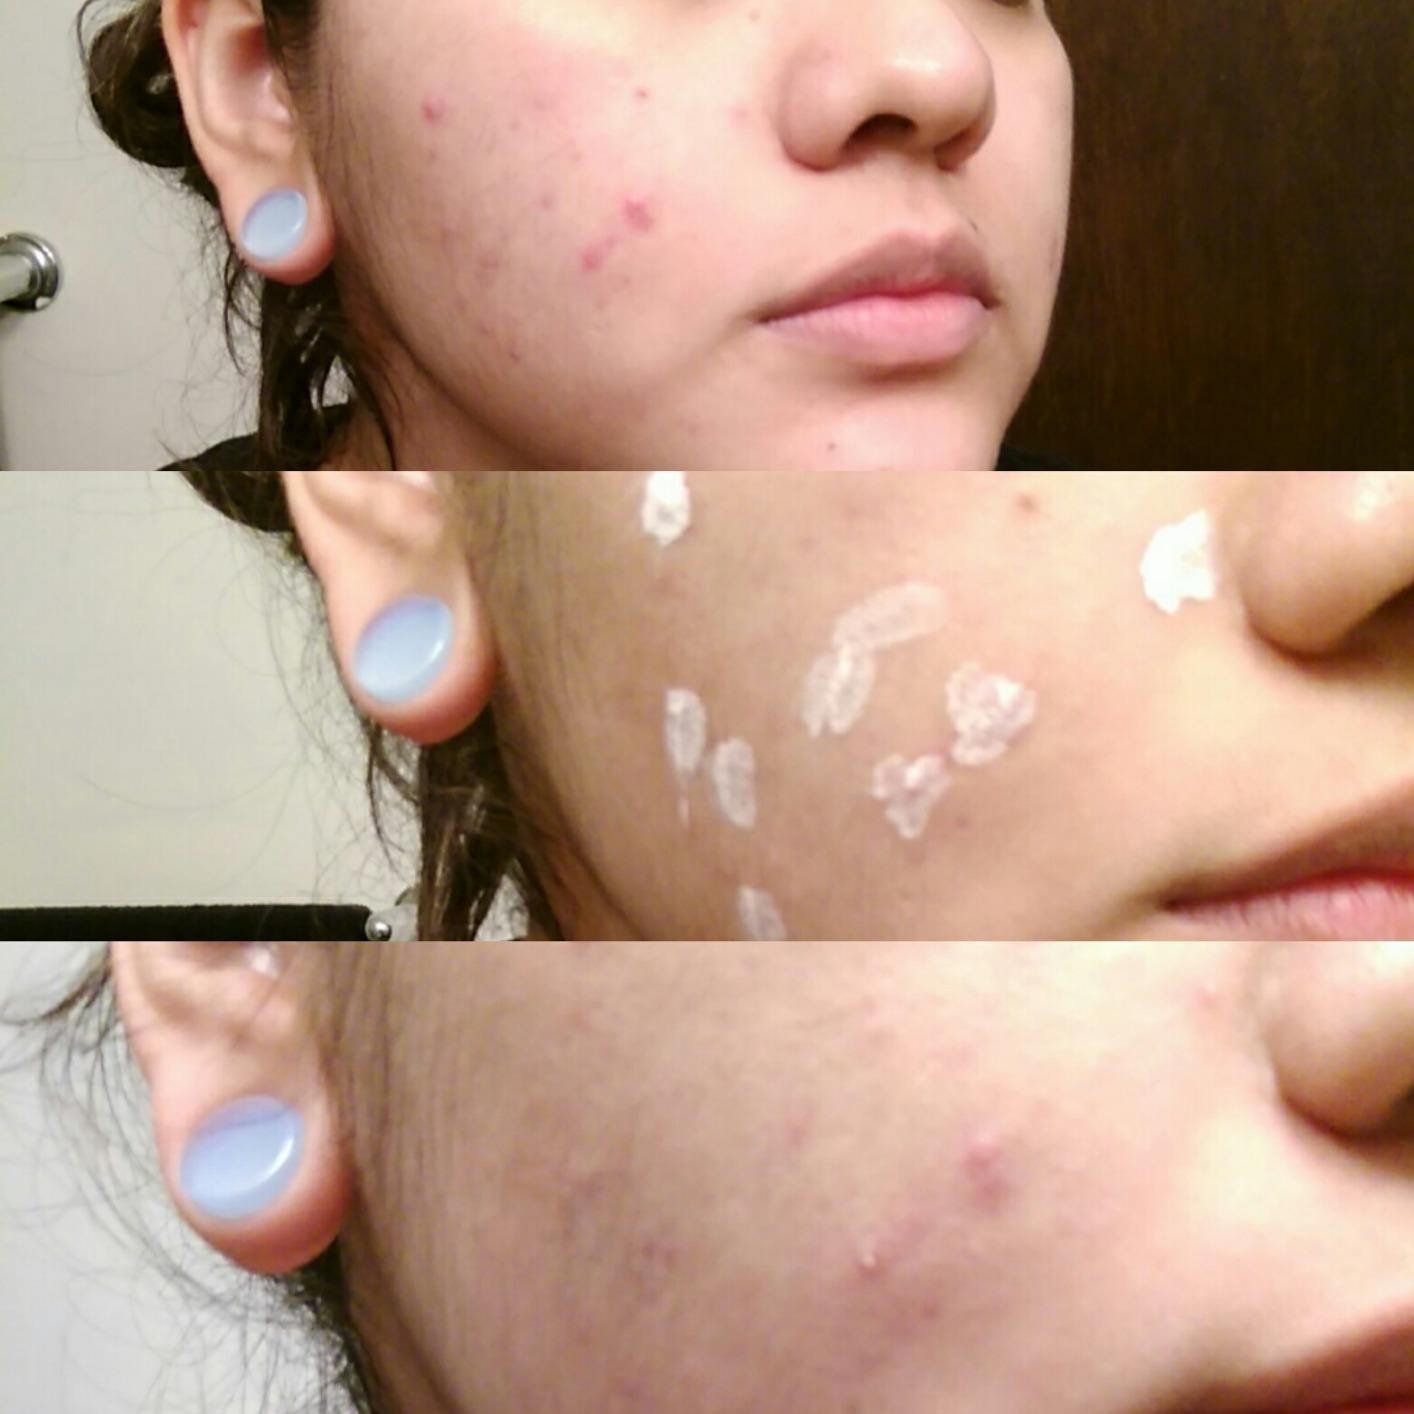 Reviewer time-lapse photos showing breakouts on their face (top), the lotion applied to the blemishes (middle), and clearer skin after using the lotion (bottom)